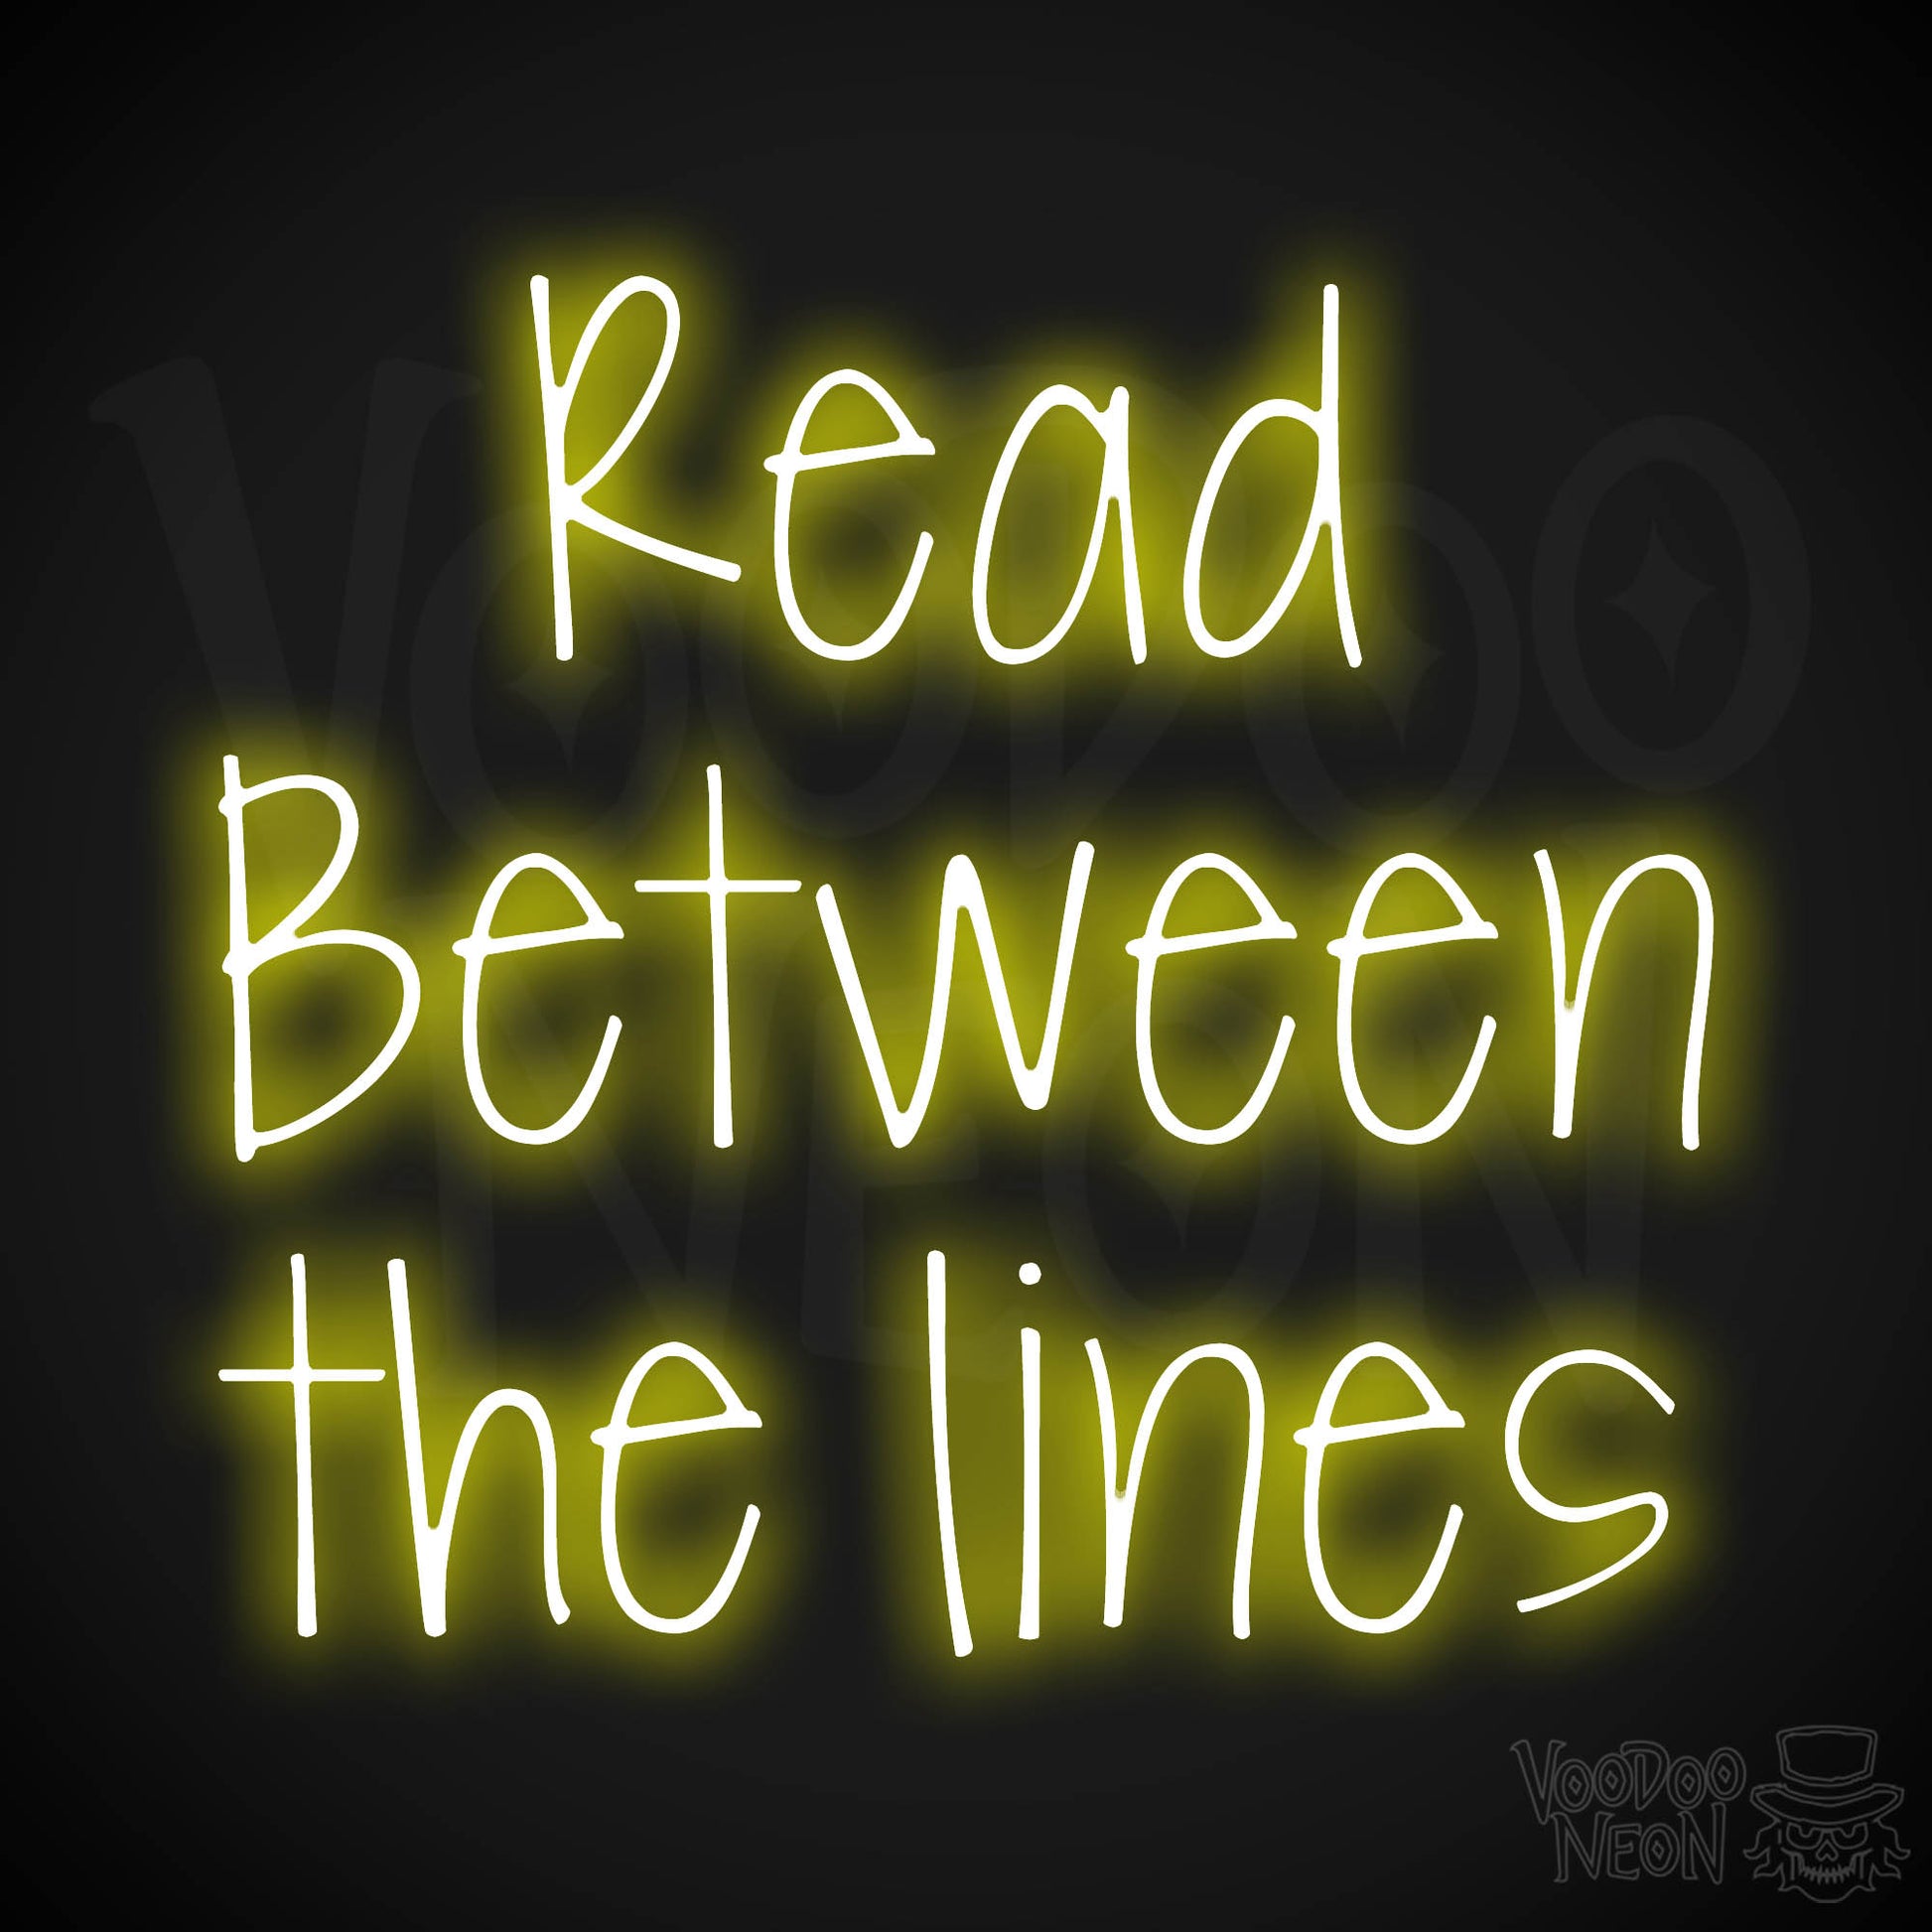 Read Between The Lines LED Neon - Yellow